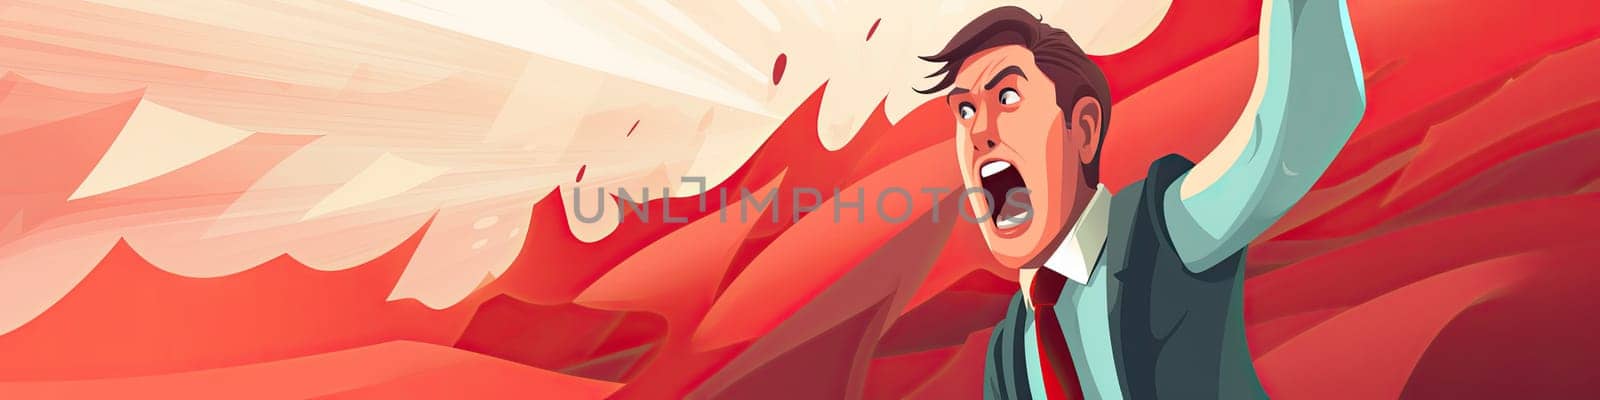 Man shouting, utter a loud call or cry, typically as an expression of a strong emotion, banner background by Kadula